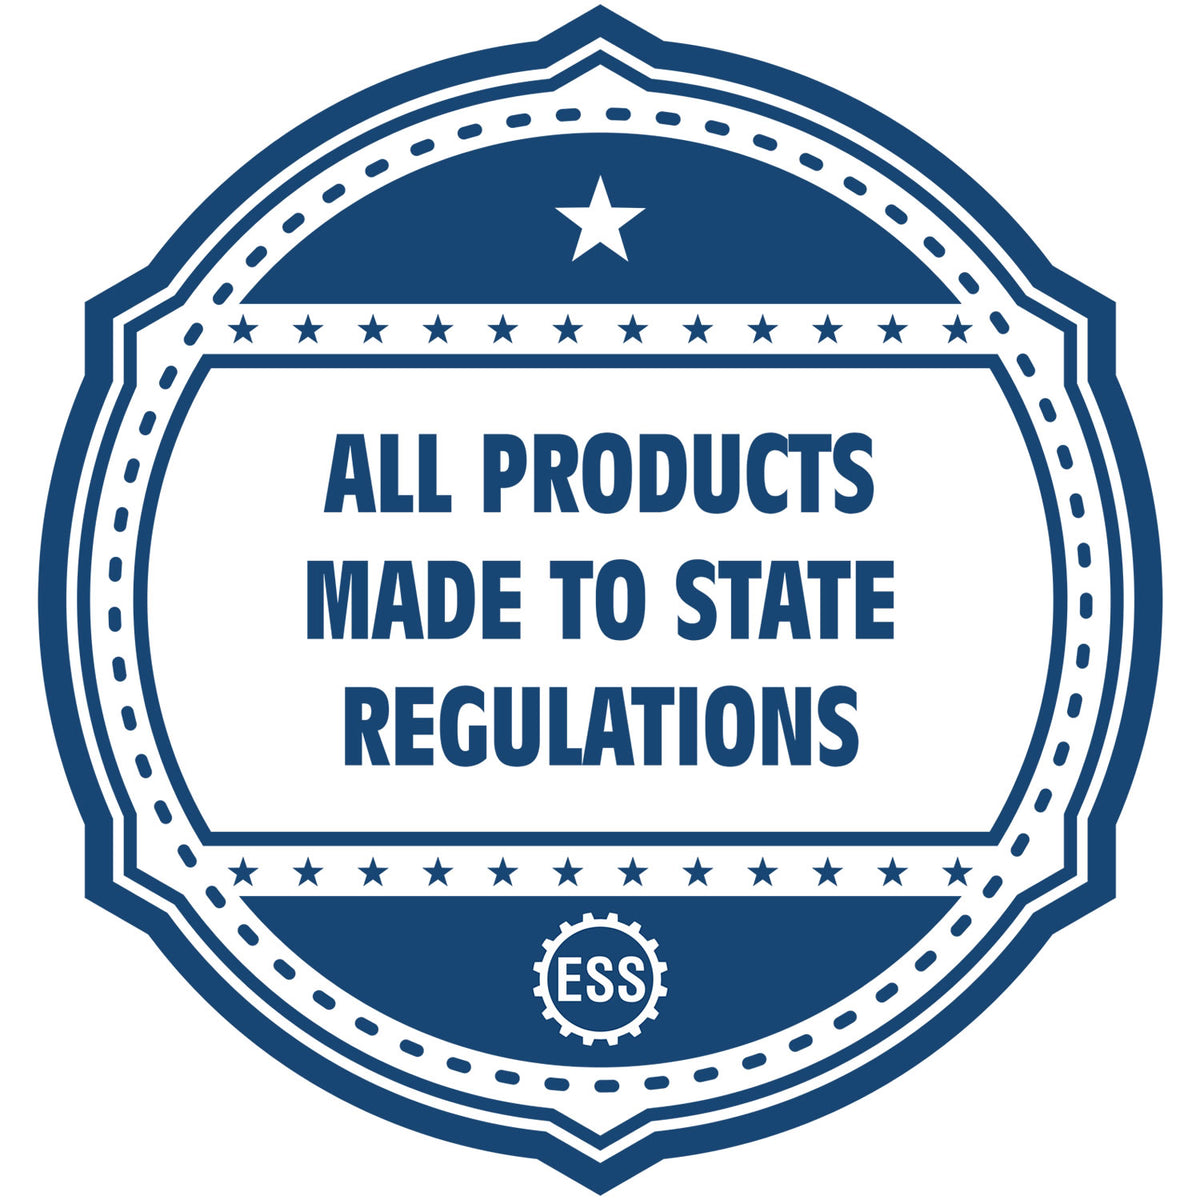 A blue icon or badge for the Hybrid Michigan Landscape Architect Seal showing that this product is made in compliance with state regulations.